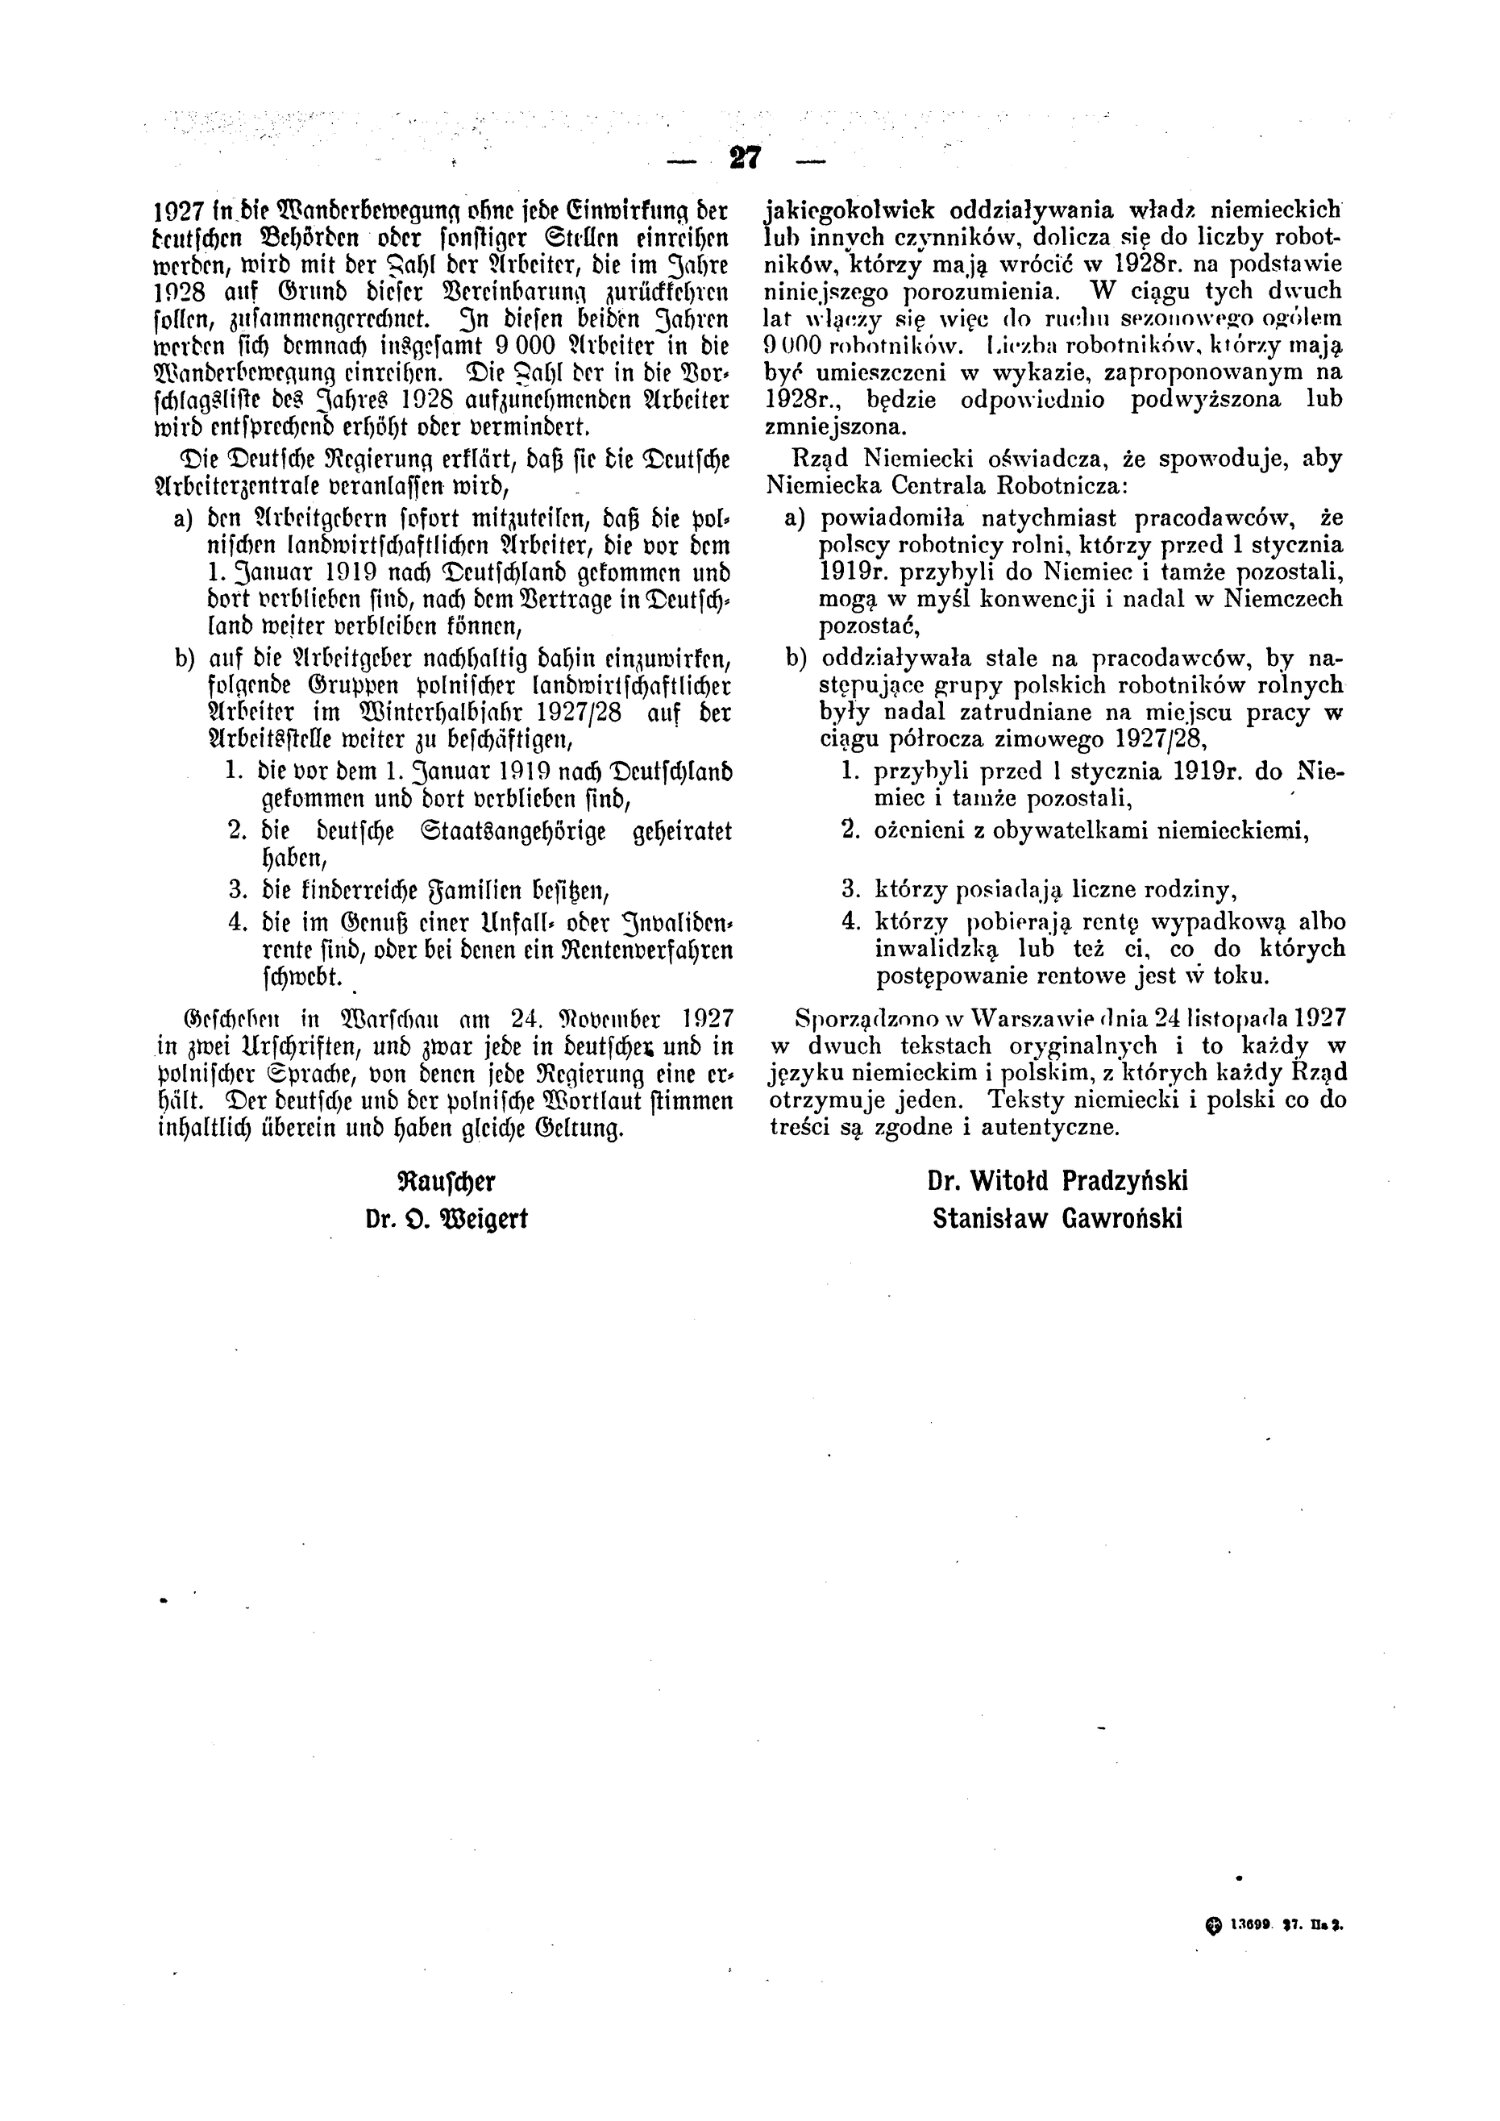 Scan of page 27